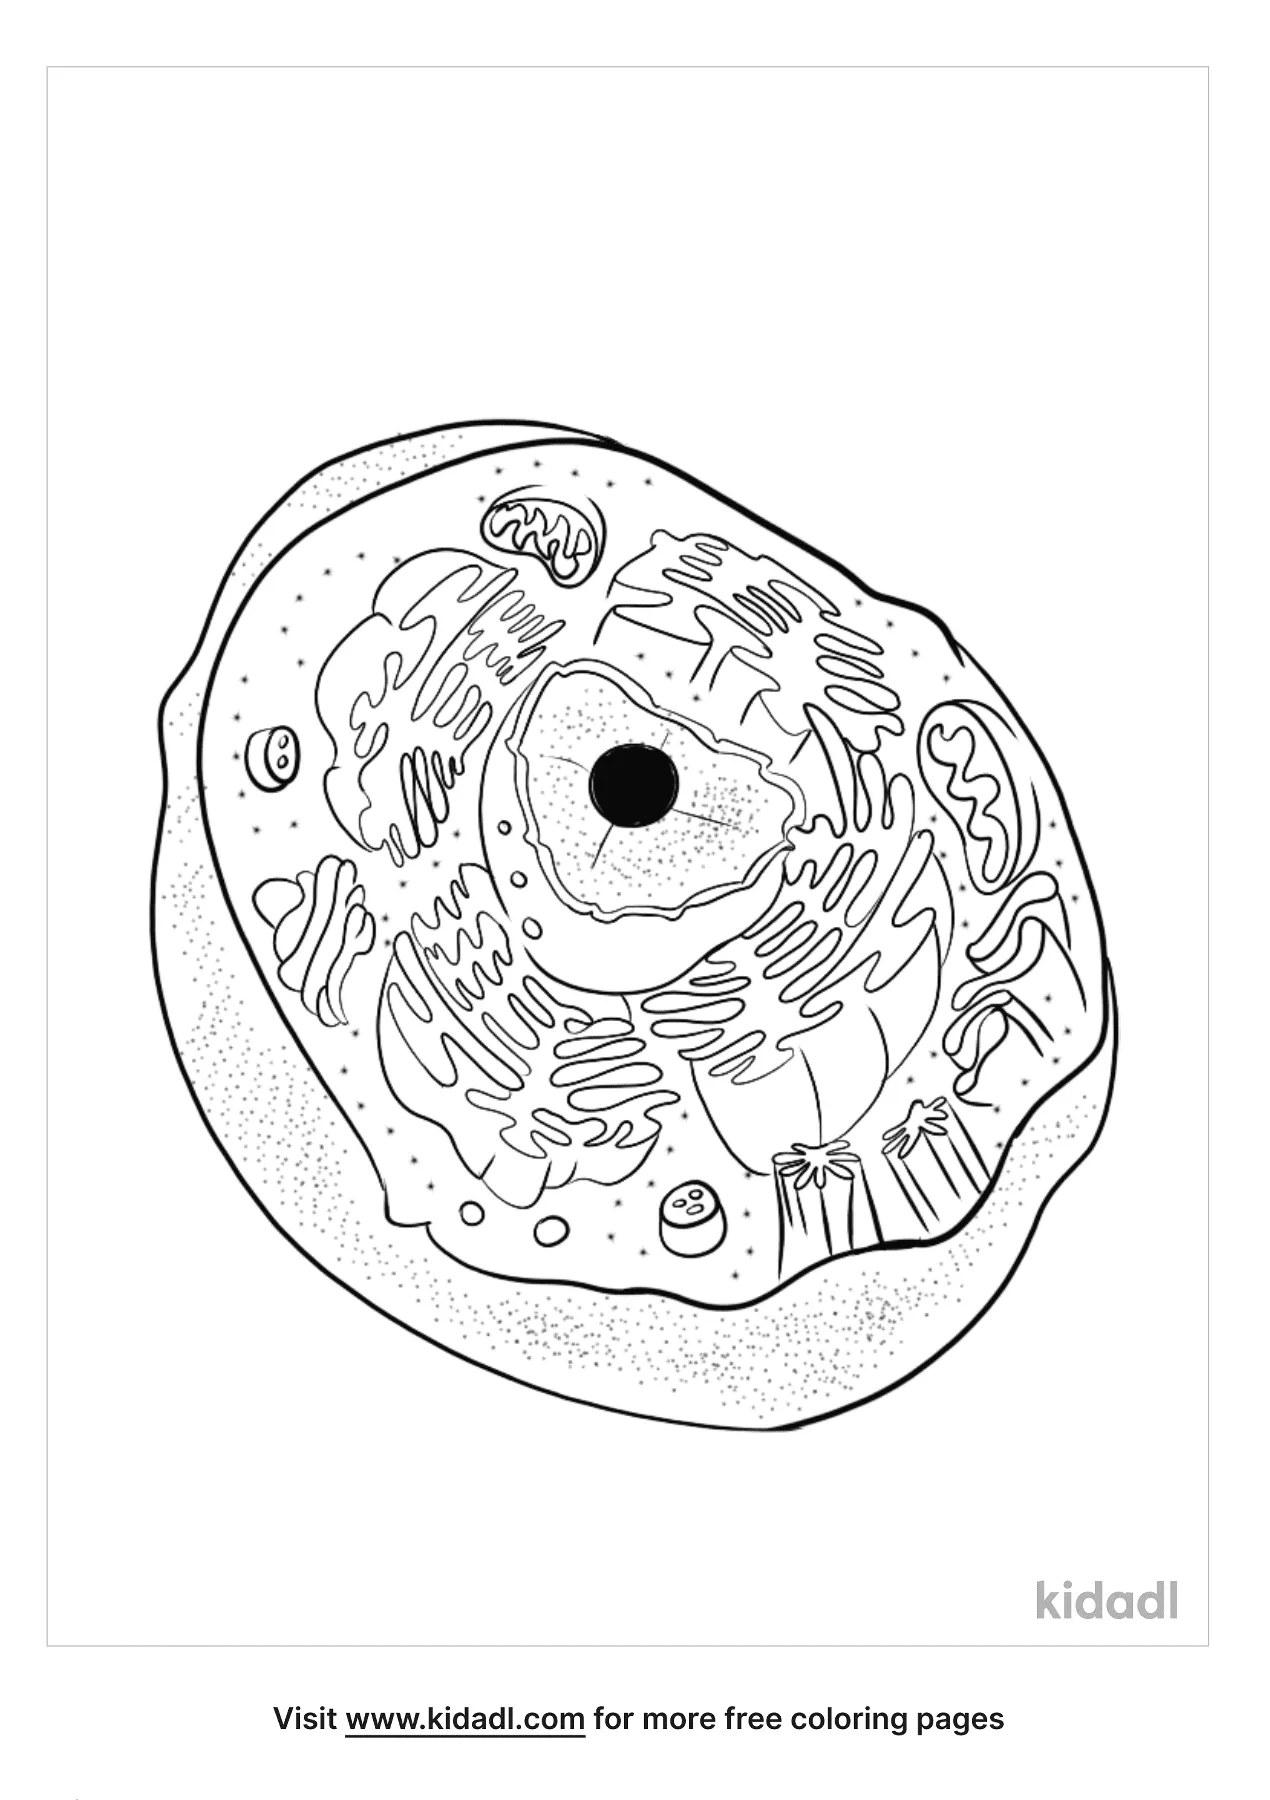 Animal Cell Coloring Pages  Free Science Coloring Pages  Kidadl In Animal Cells Coloring Worksheet